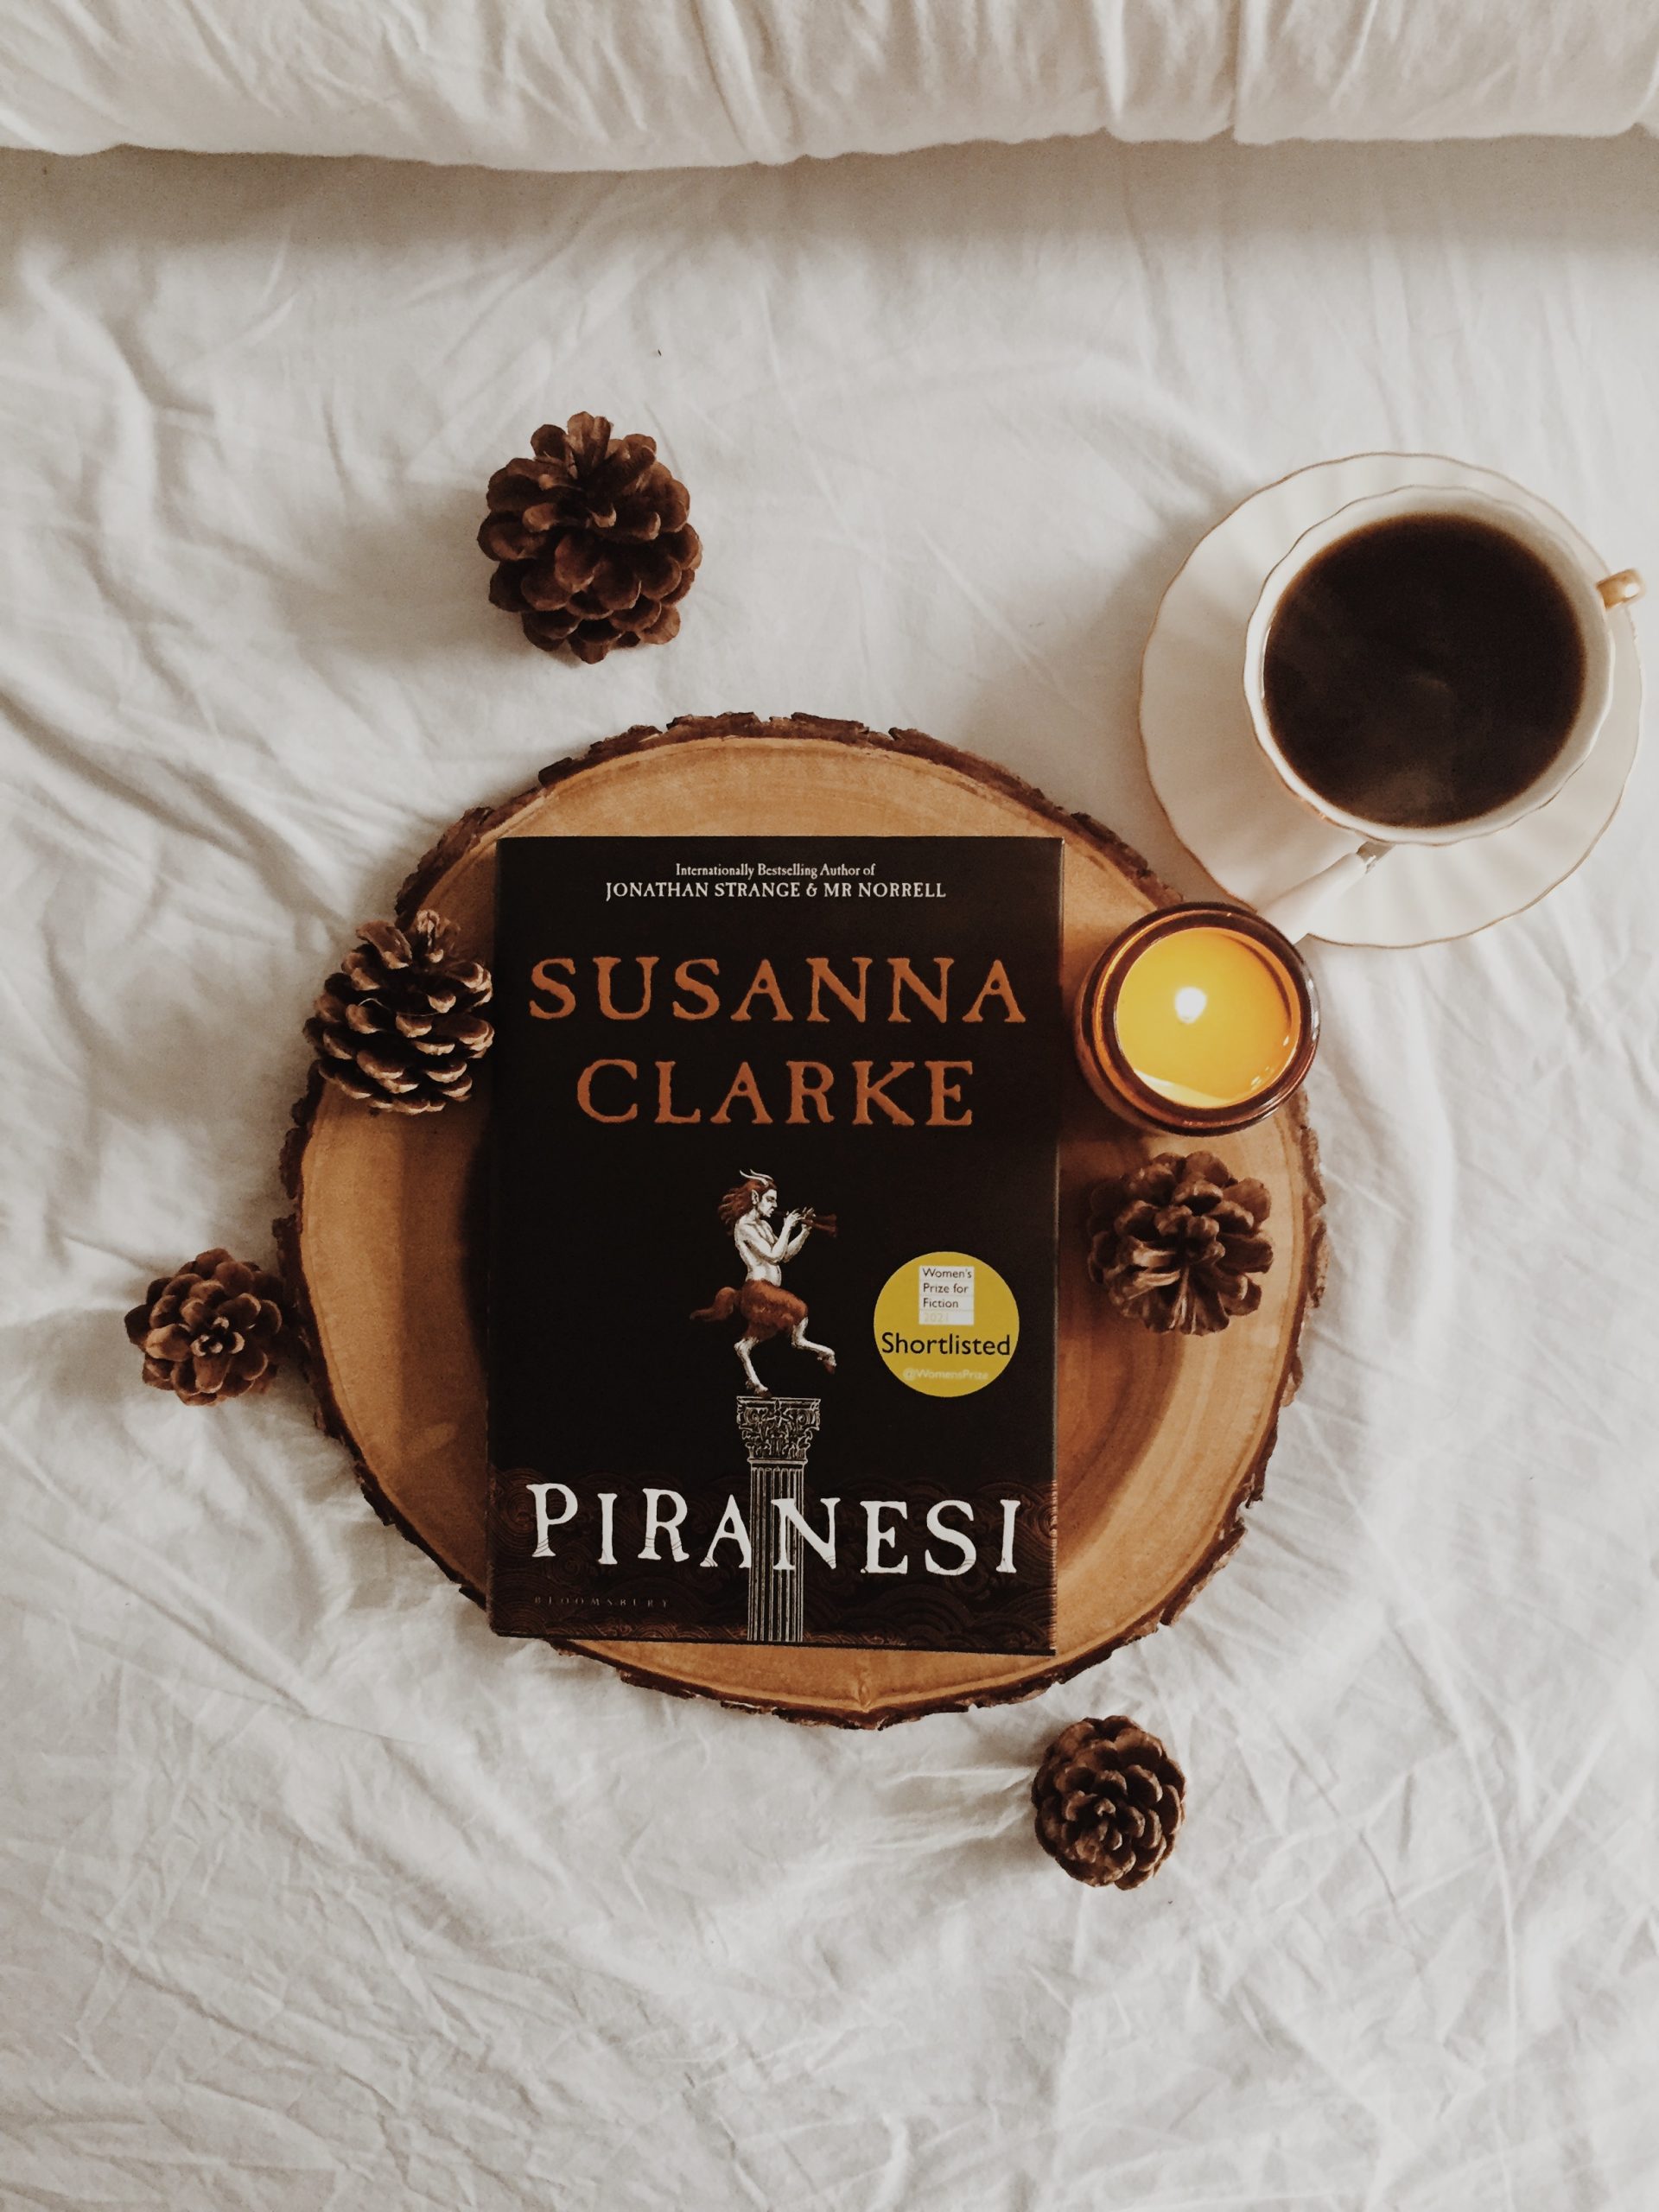 Image of the book "Piranesi" by Susanna Clarke, taken by Molly Whitehouse and edited with VSCO m5 preset